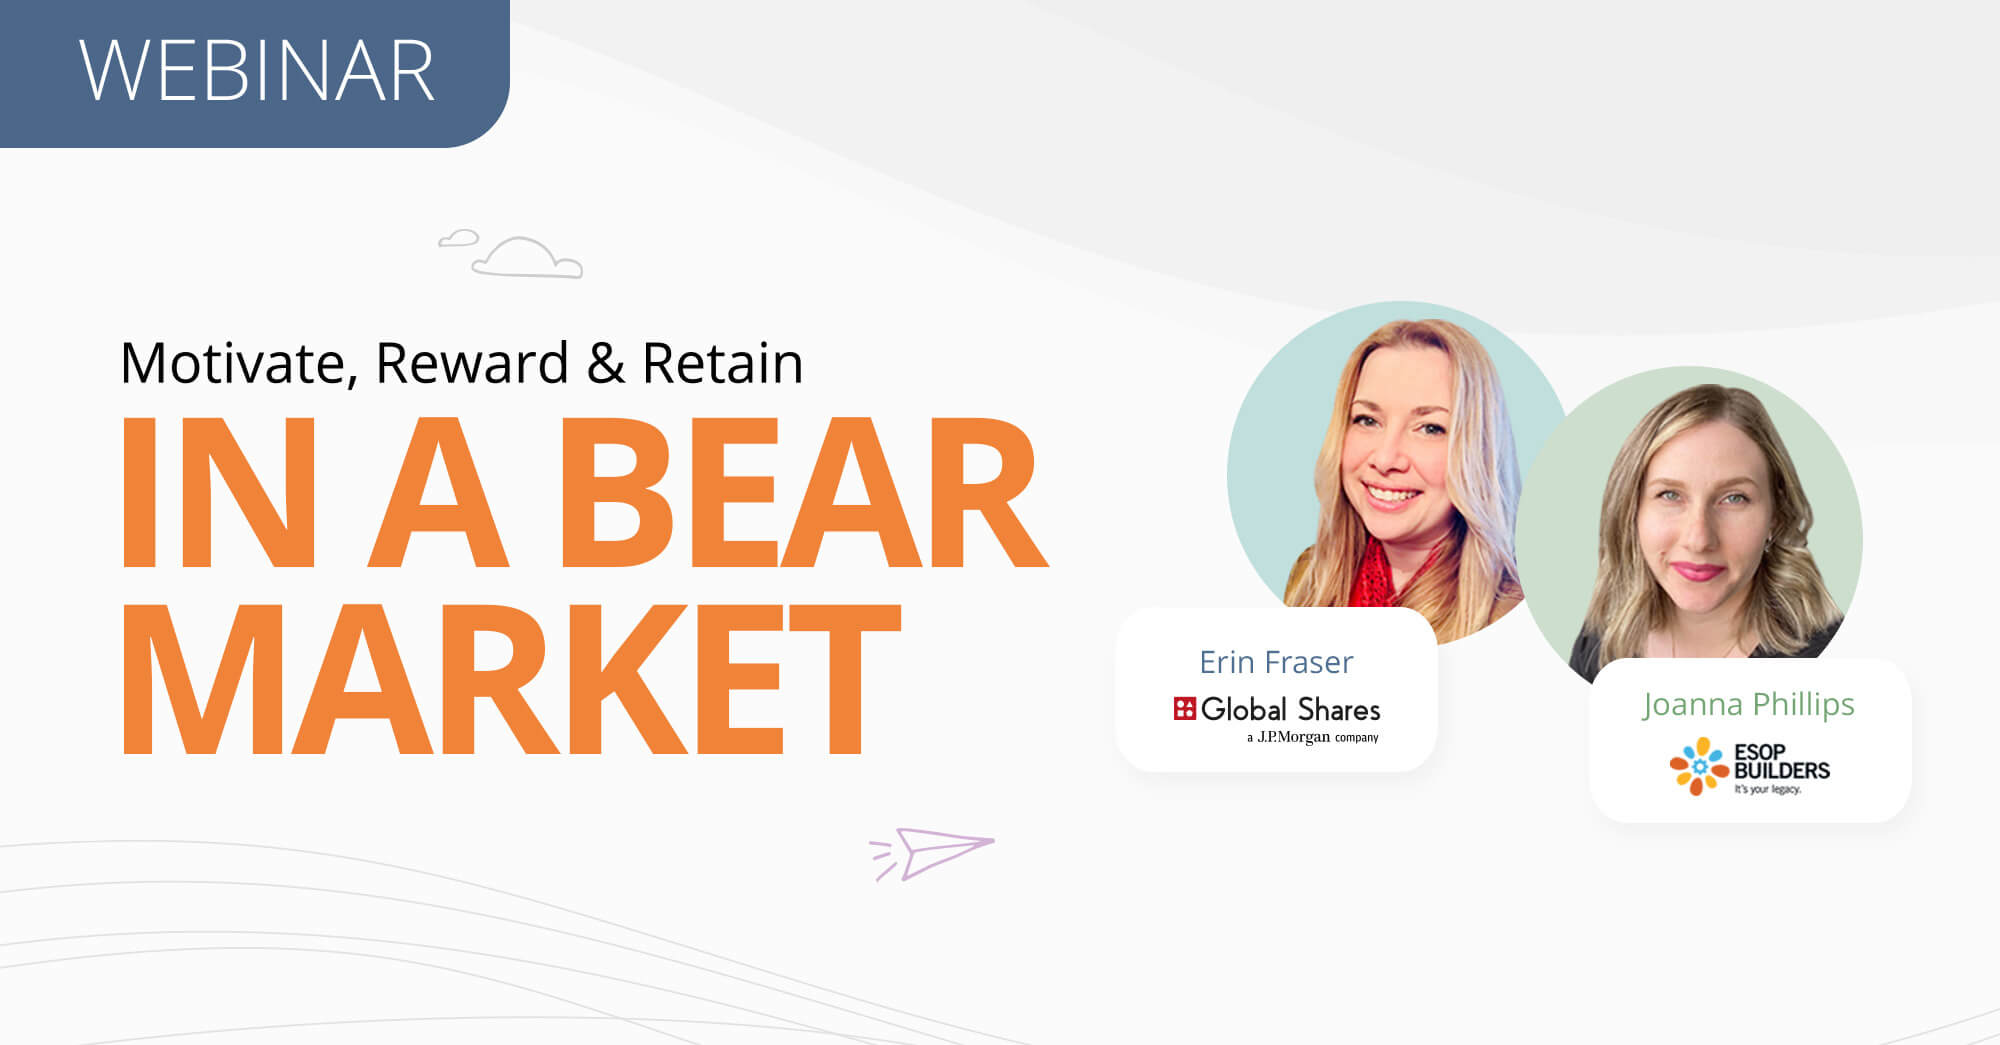 Webinar: How to Motivate, Reward and Retain in a Bear Market